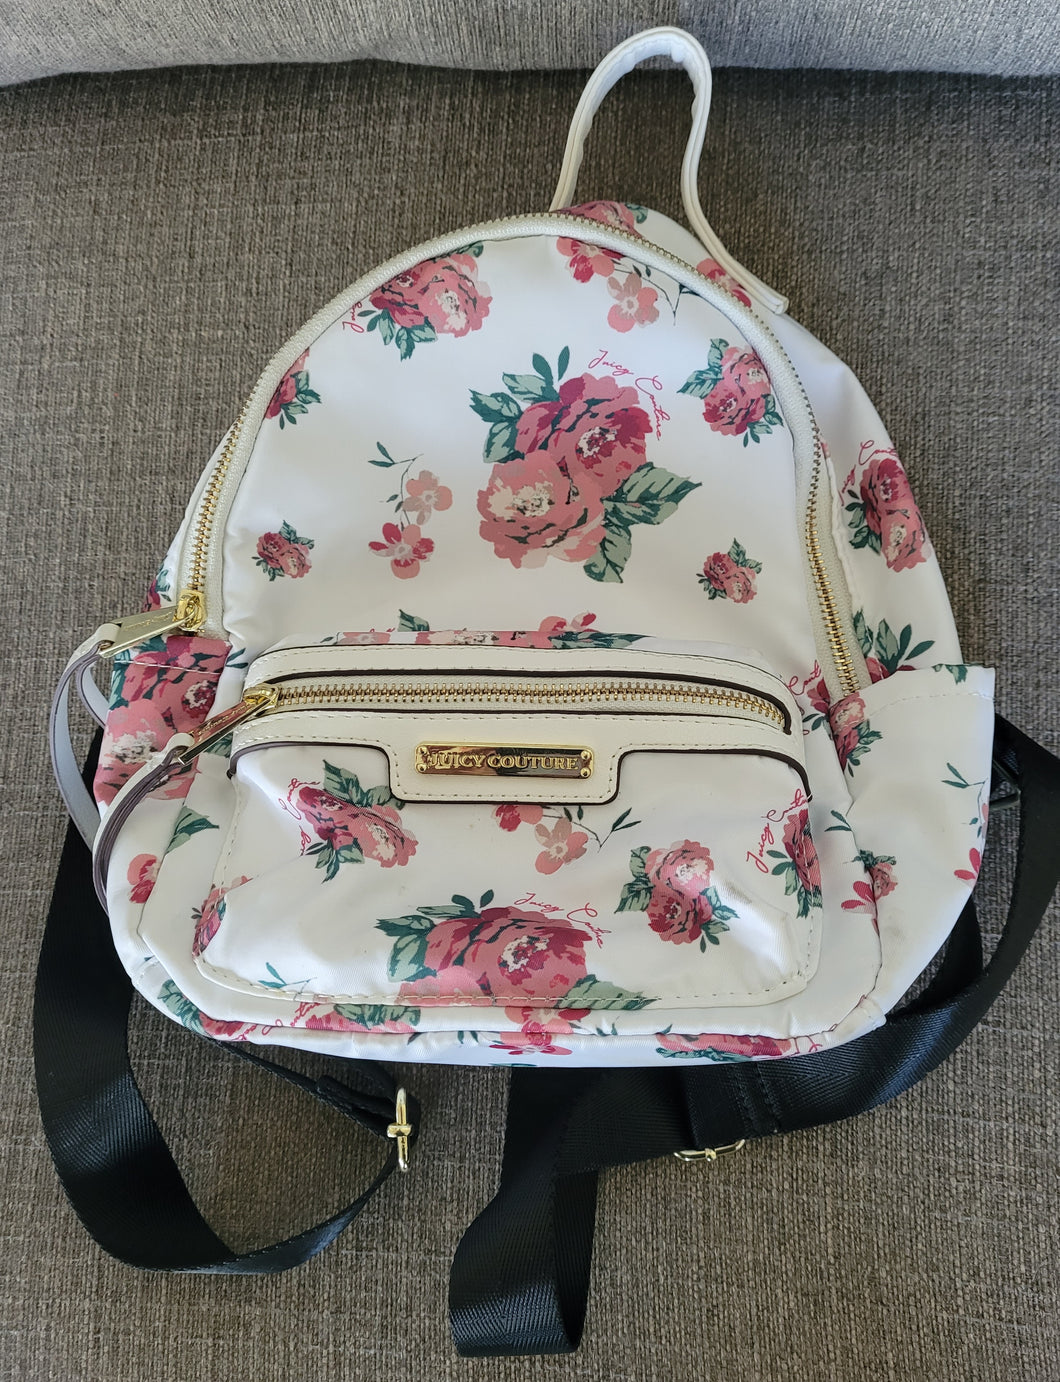 Juicy couture floral purse/backpack